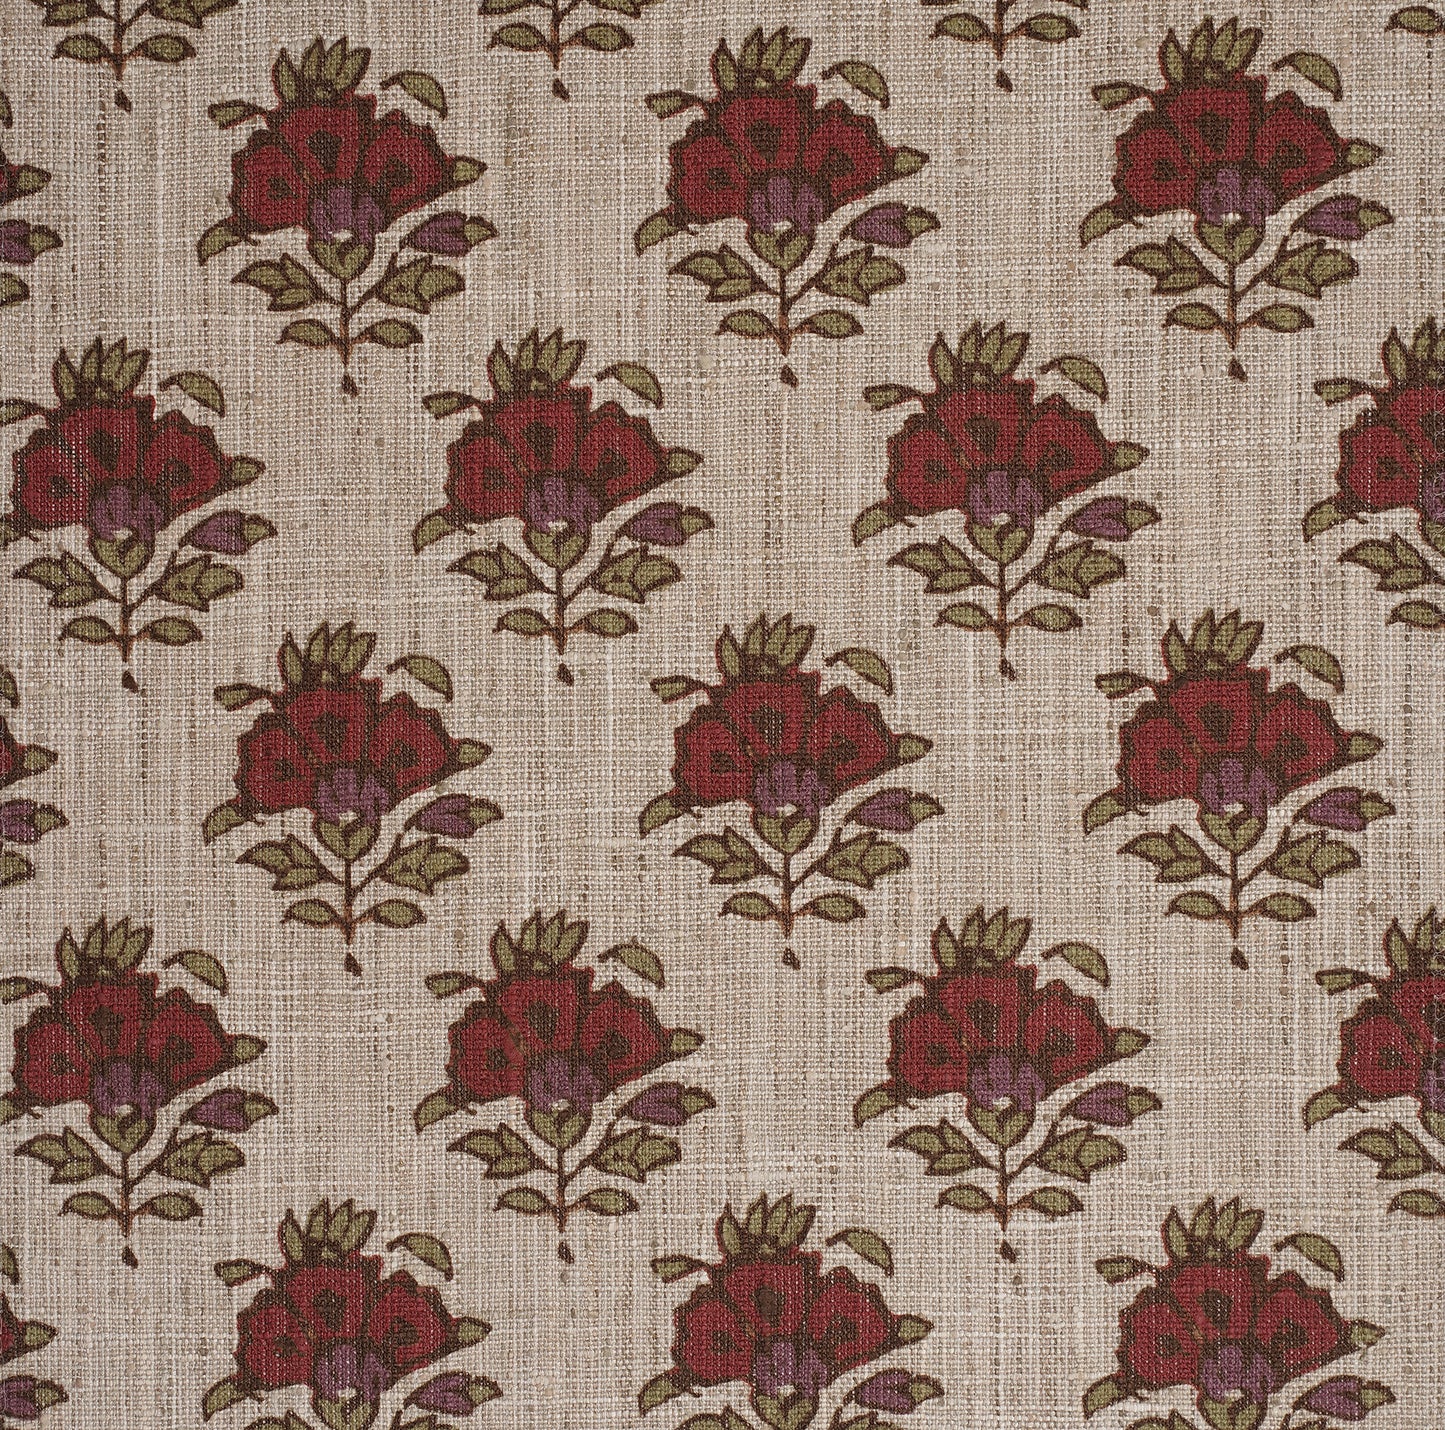 FLOWER MOTIF PRINTED FABRIC -  RED & GREEN